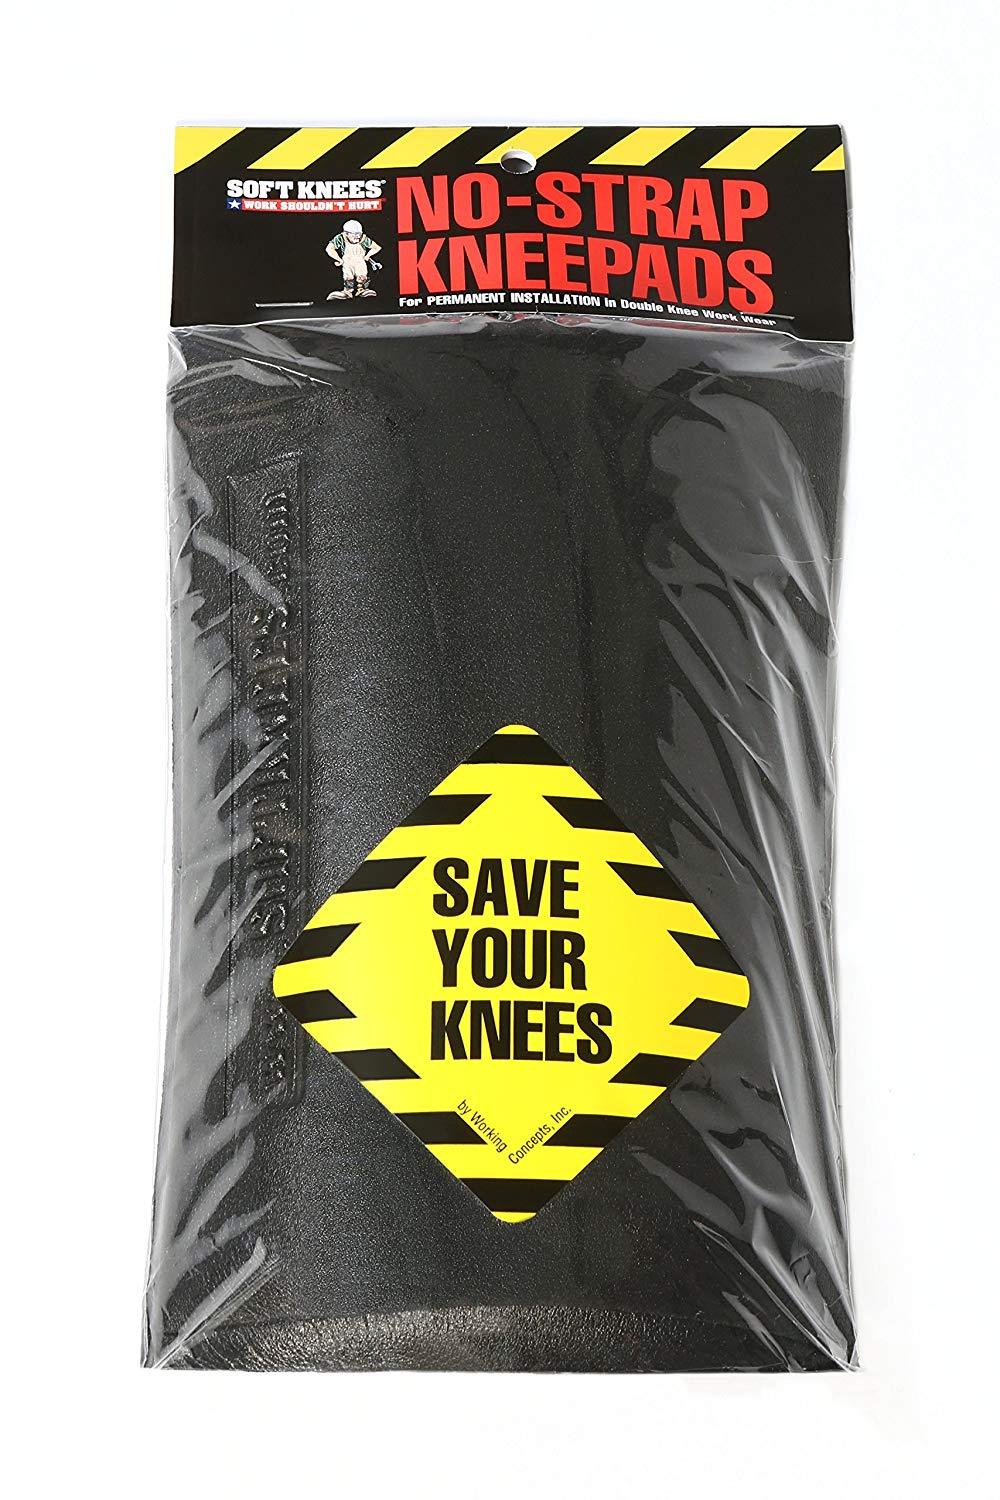 1010 Soft Knees No Strap Knee Pads - Inserts 6 X 9 Safety